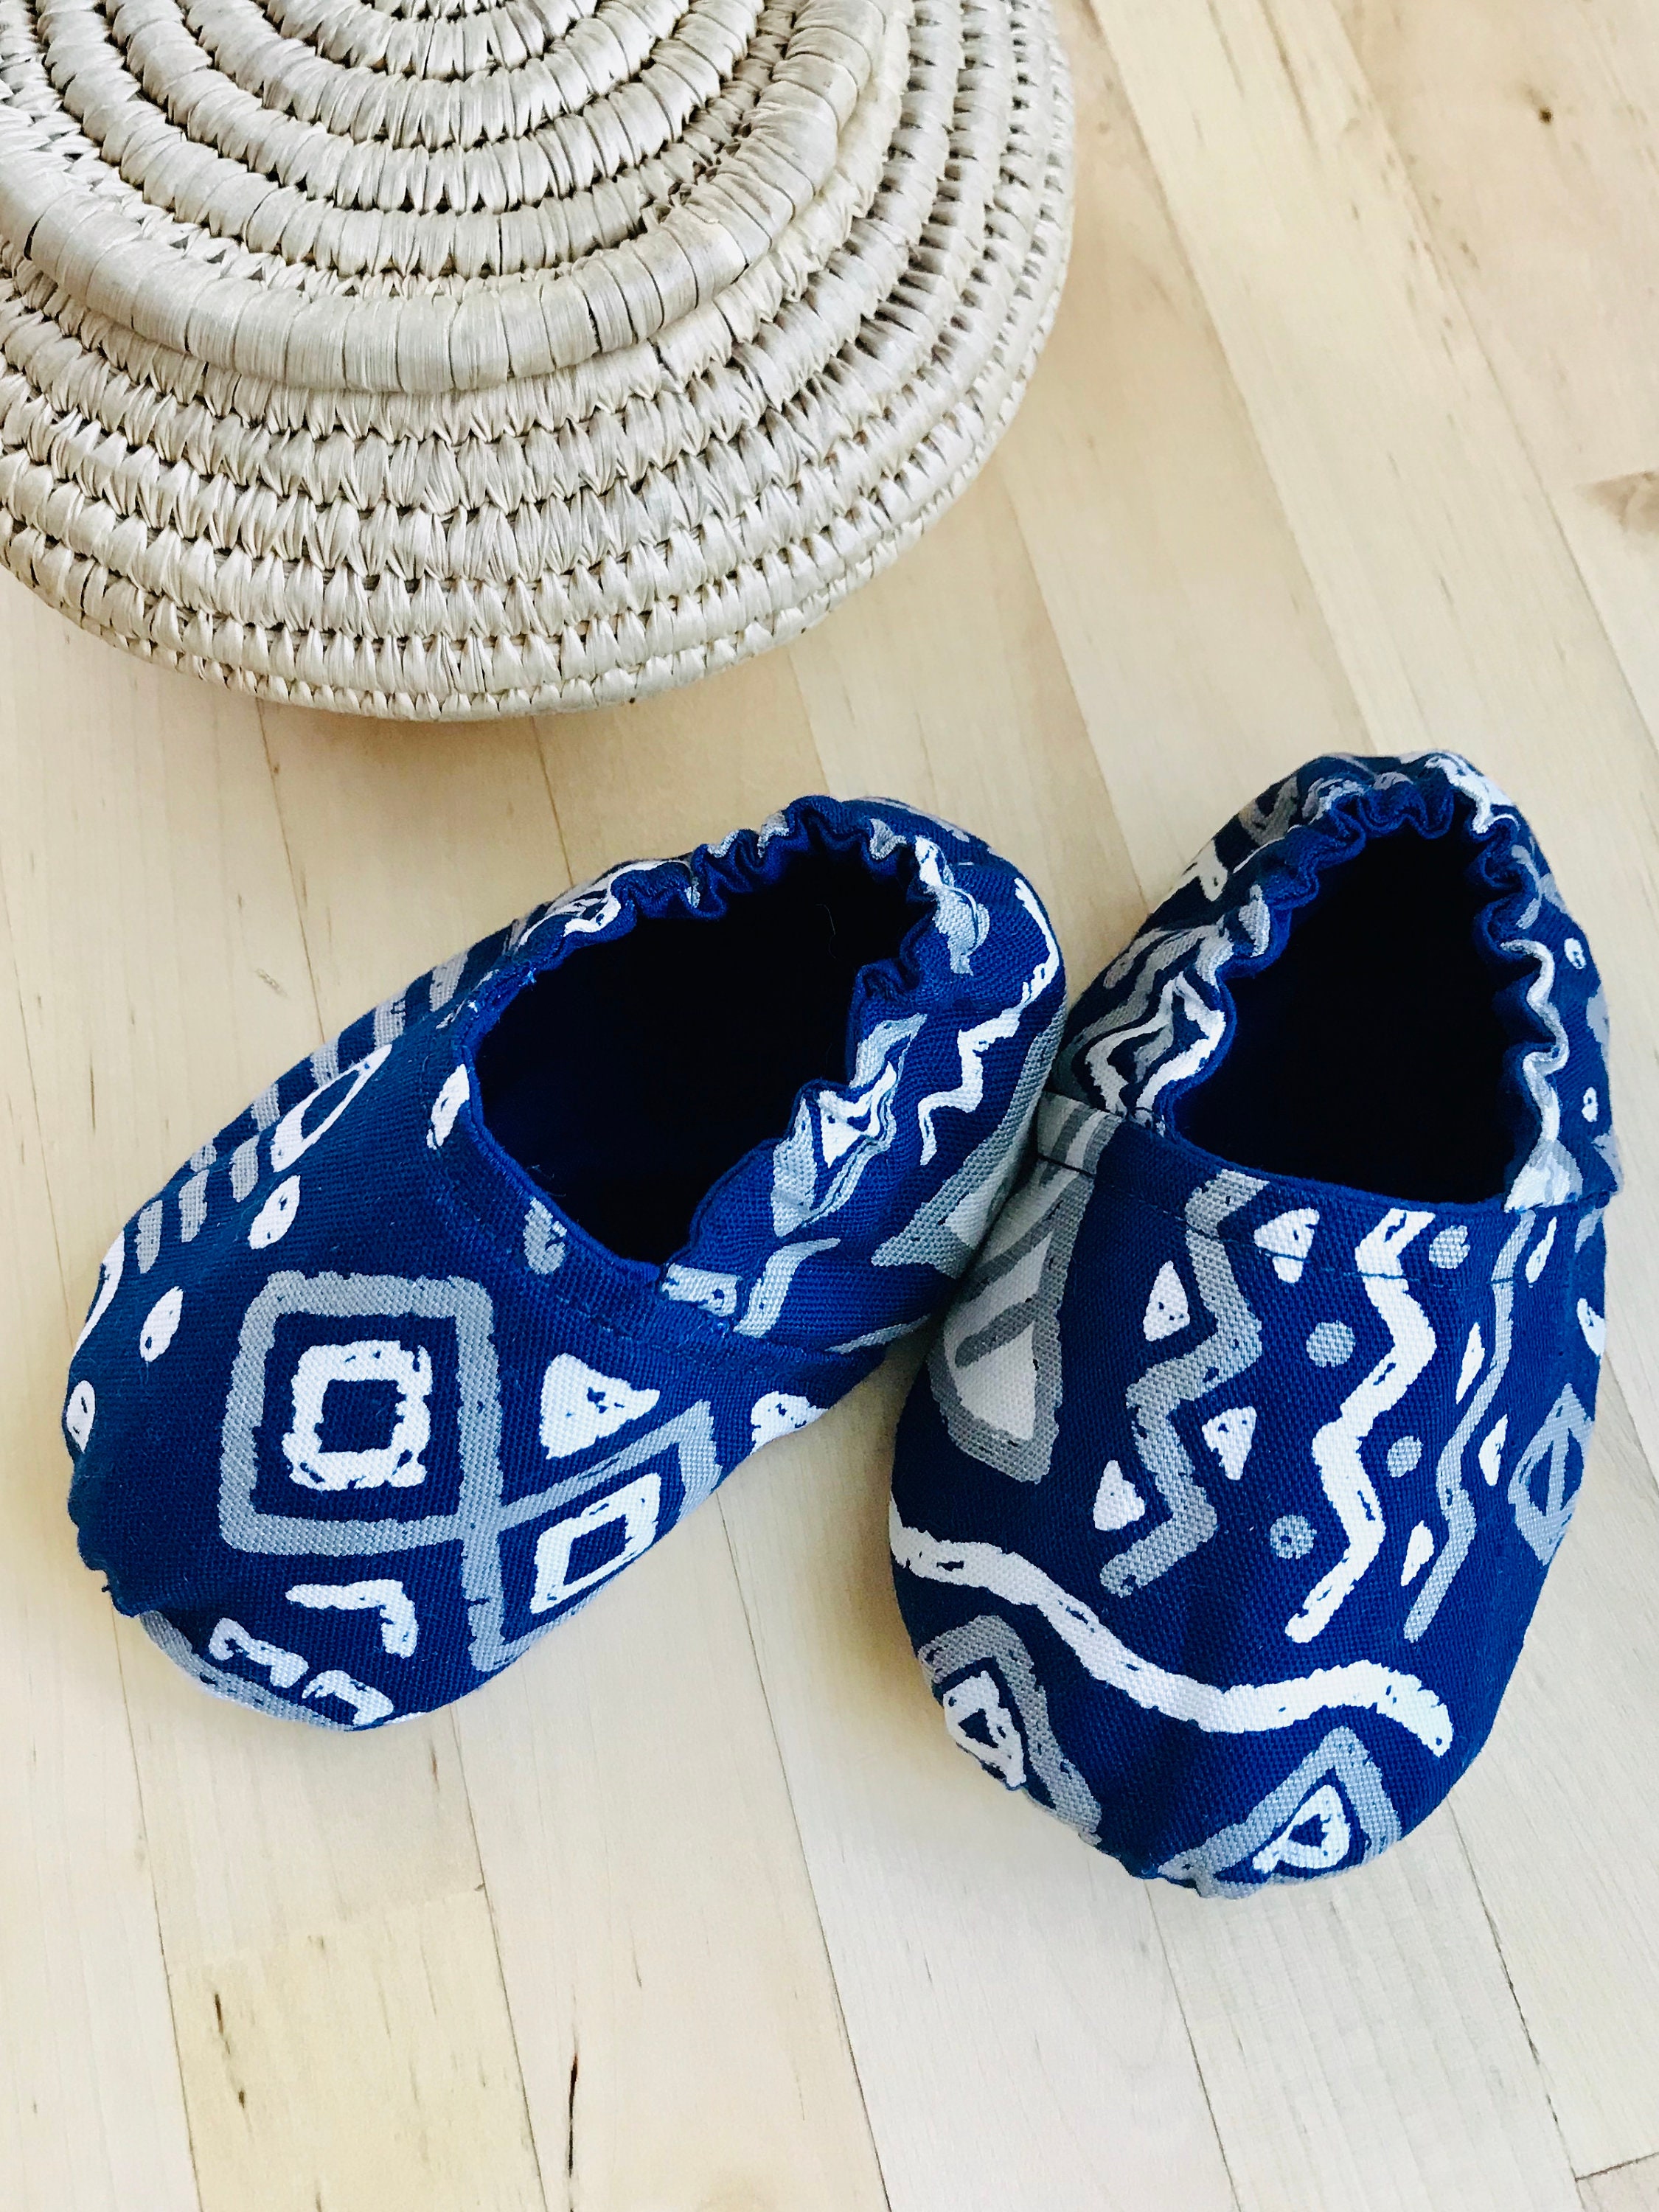 Soft baby shoes made with Japanese fabric/Baby booties/Baby | Etsy